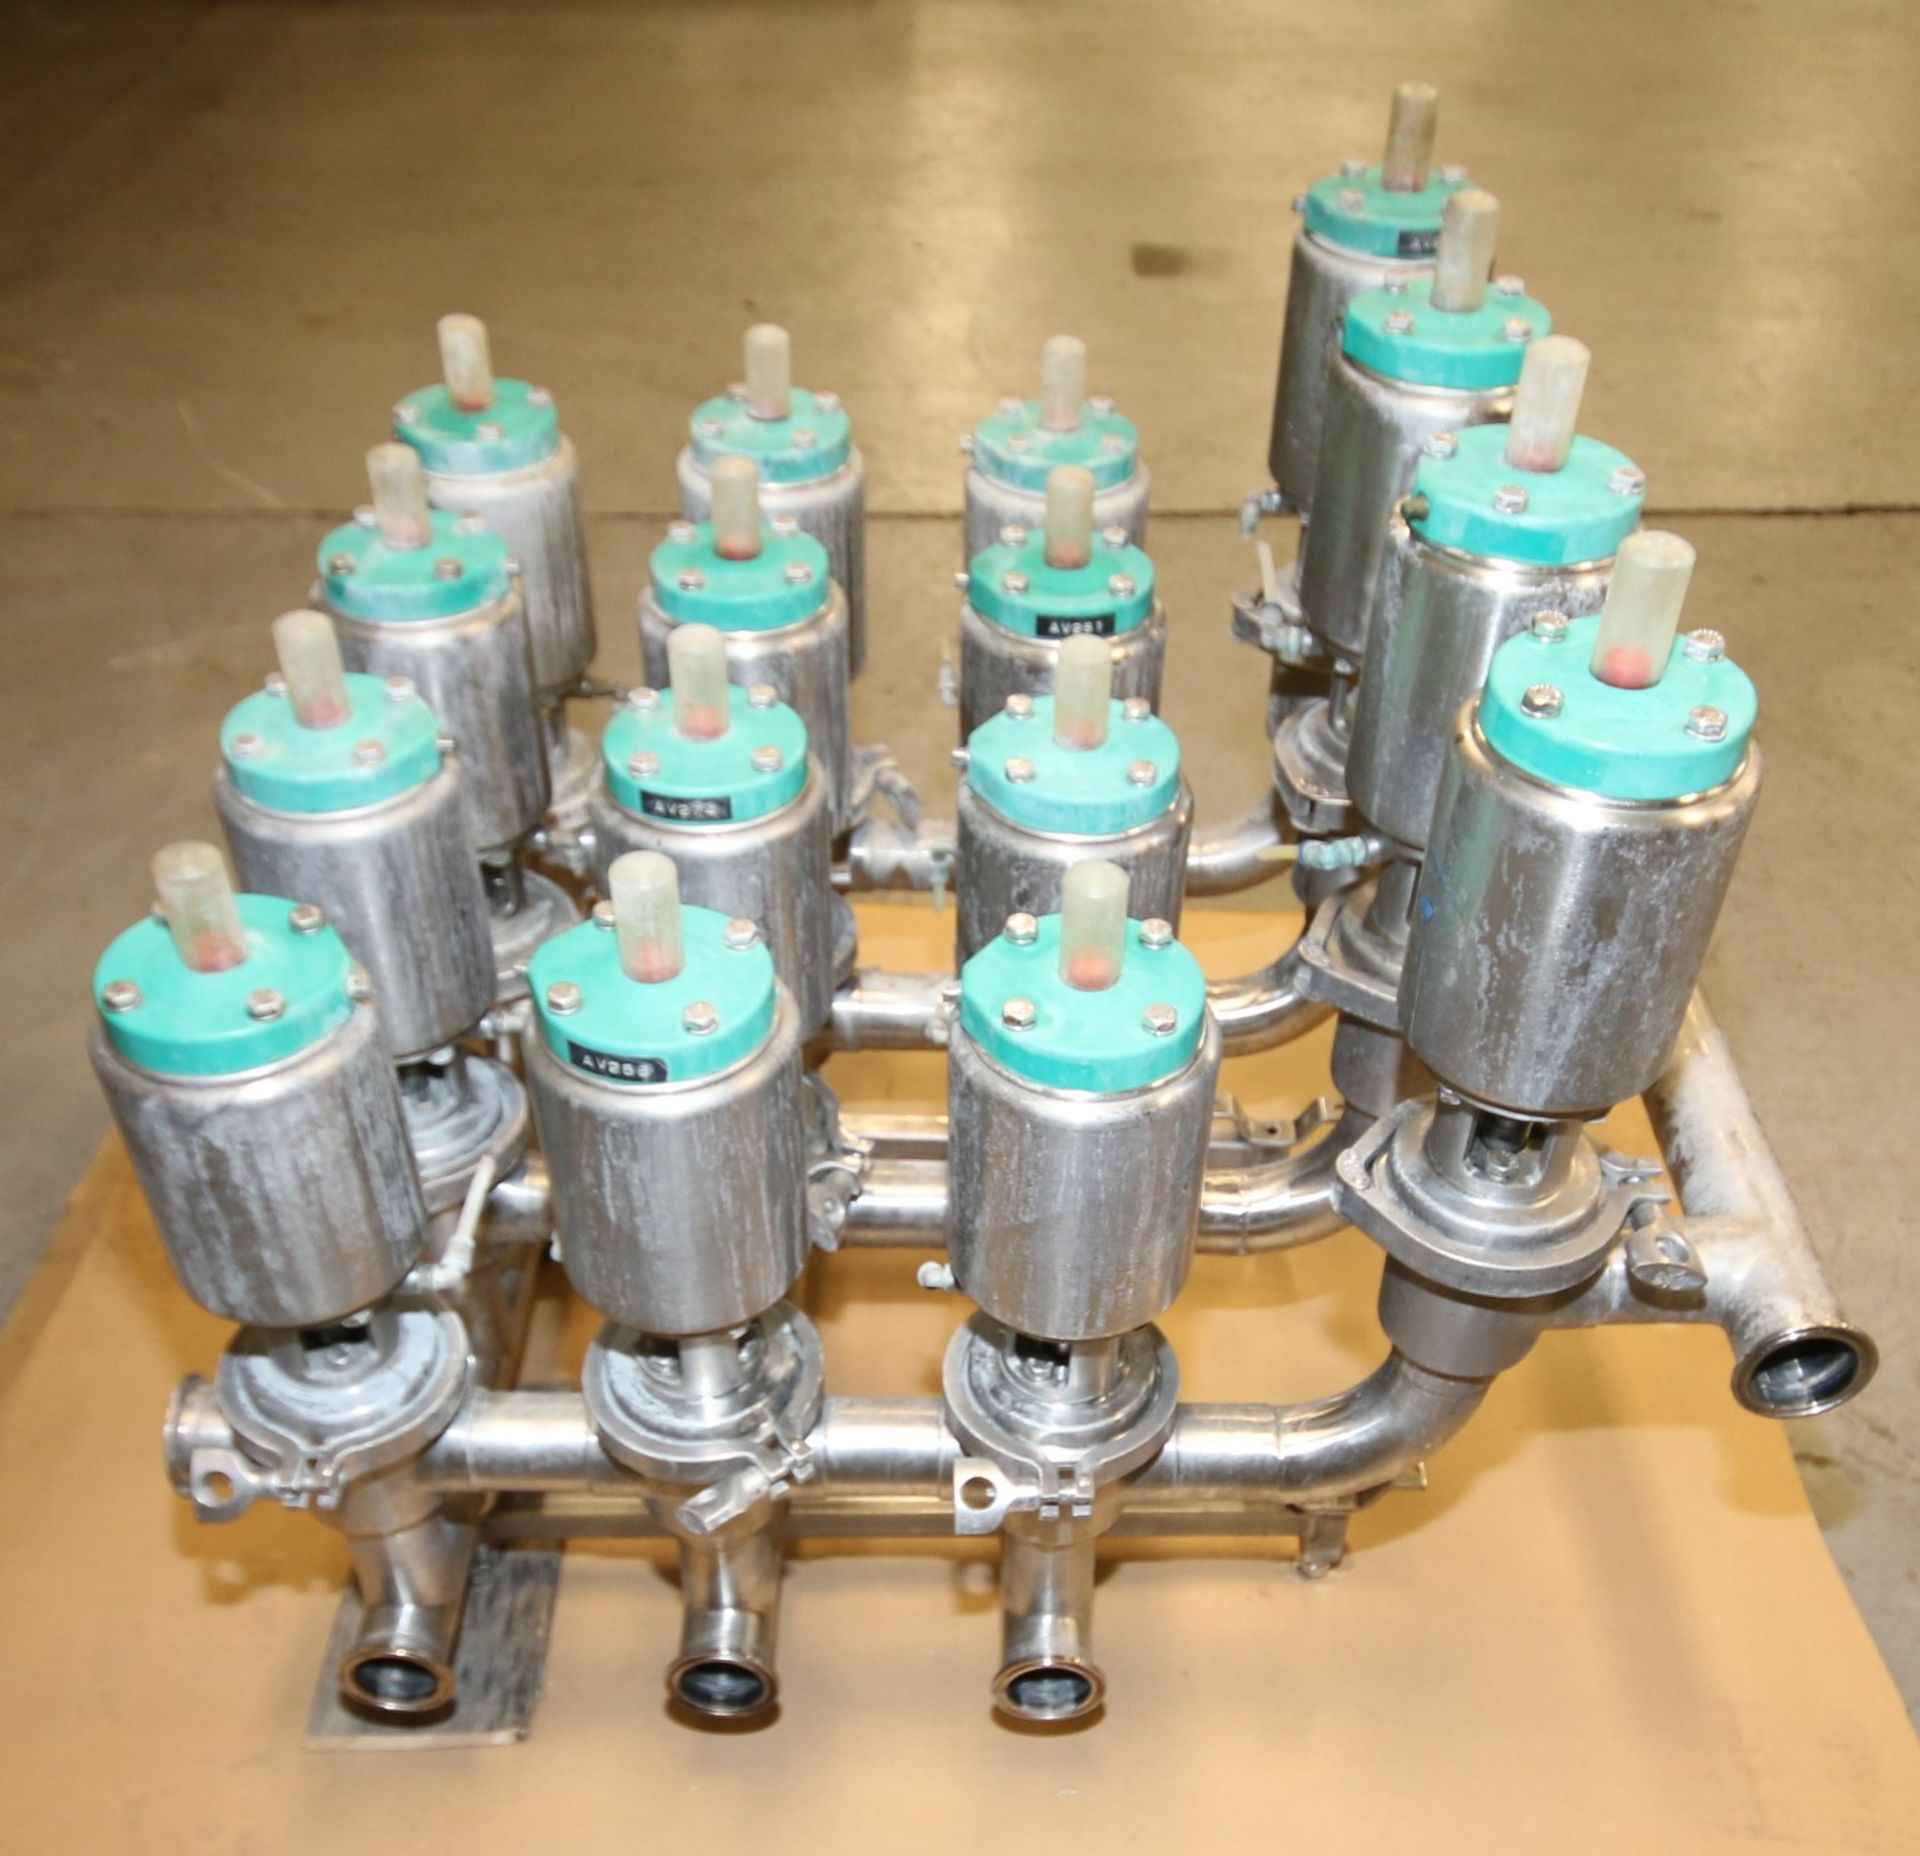 16-Valve Tri-Clover 2" S/S Air Valve Manifold / Cluster, with Model 761 Valves - Image 4 of 4